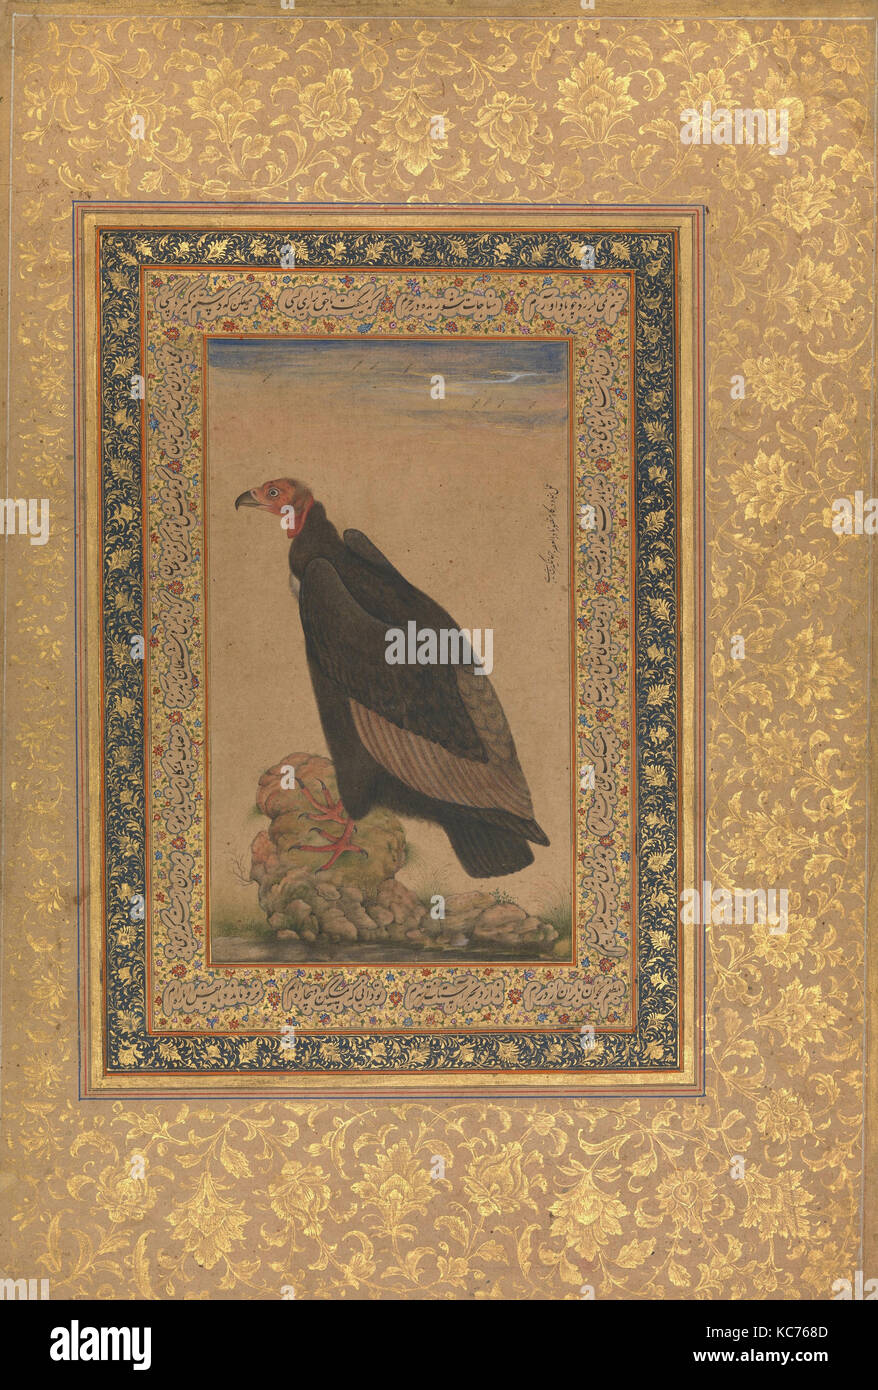 'Red-Headed Vulture', Folio from the Shah Jahan Album, recto and verso: early 19th century Stock Photo